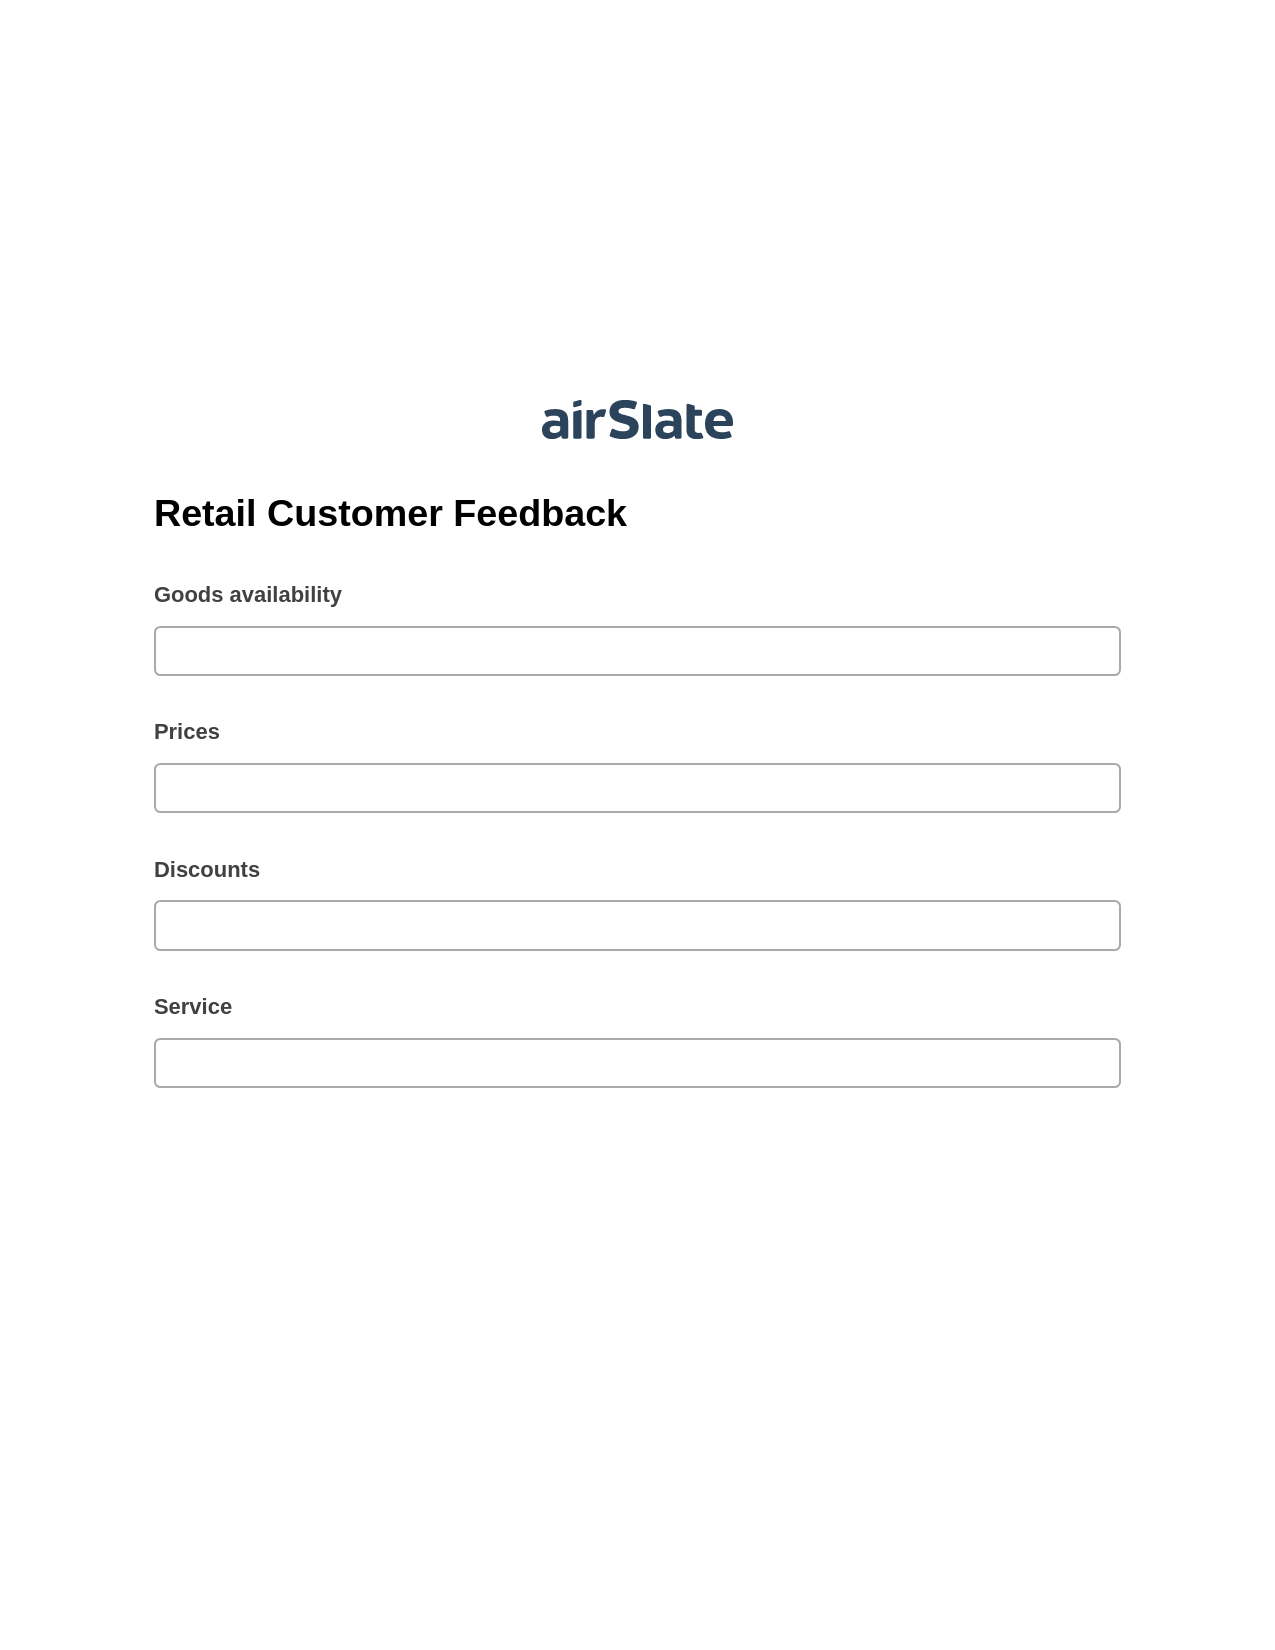 Multirole Retail Customer Feedback Pre-fill Slate from MS Dynamics 365 Records Bot, Email Notification Bot, Export to Formstack Documents Bot